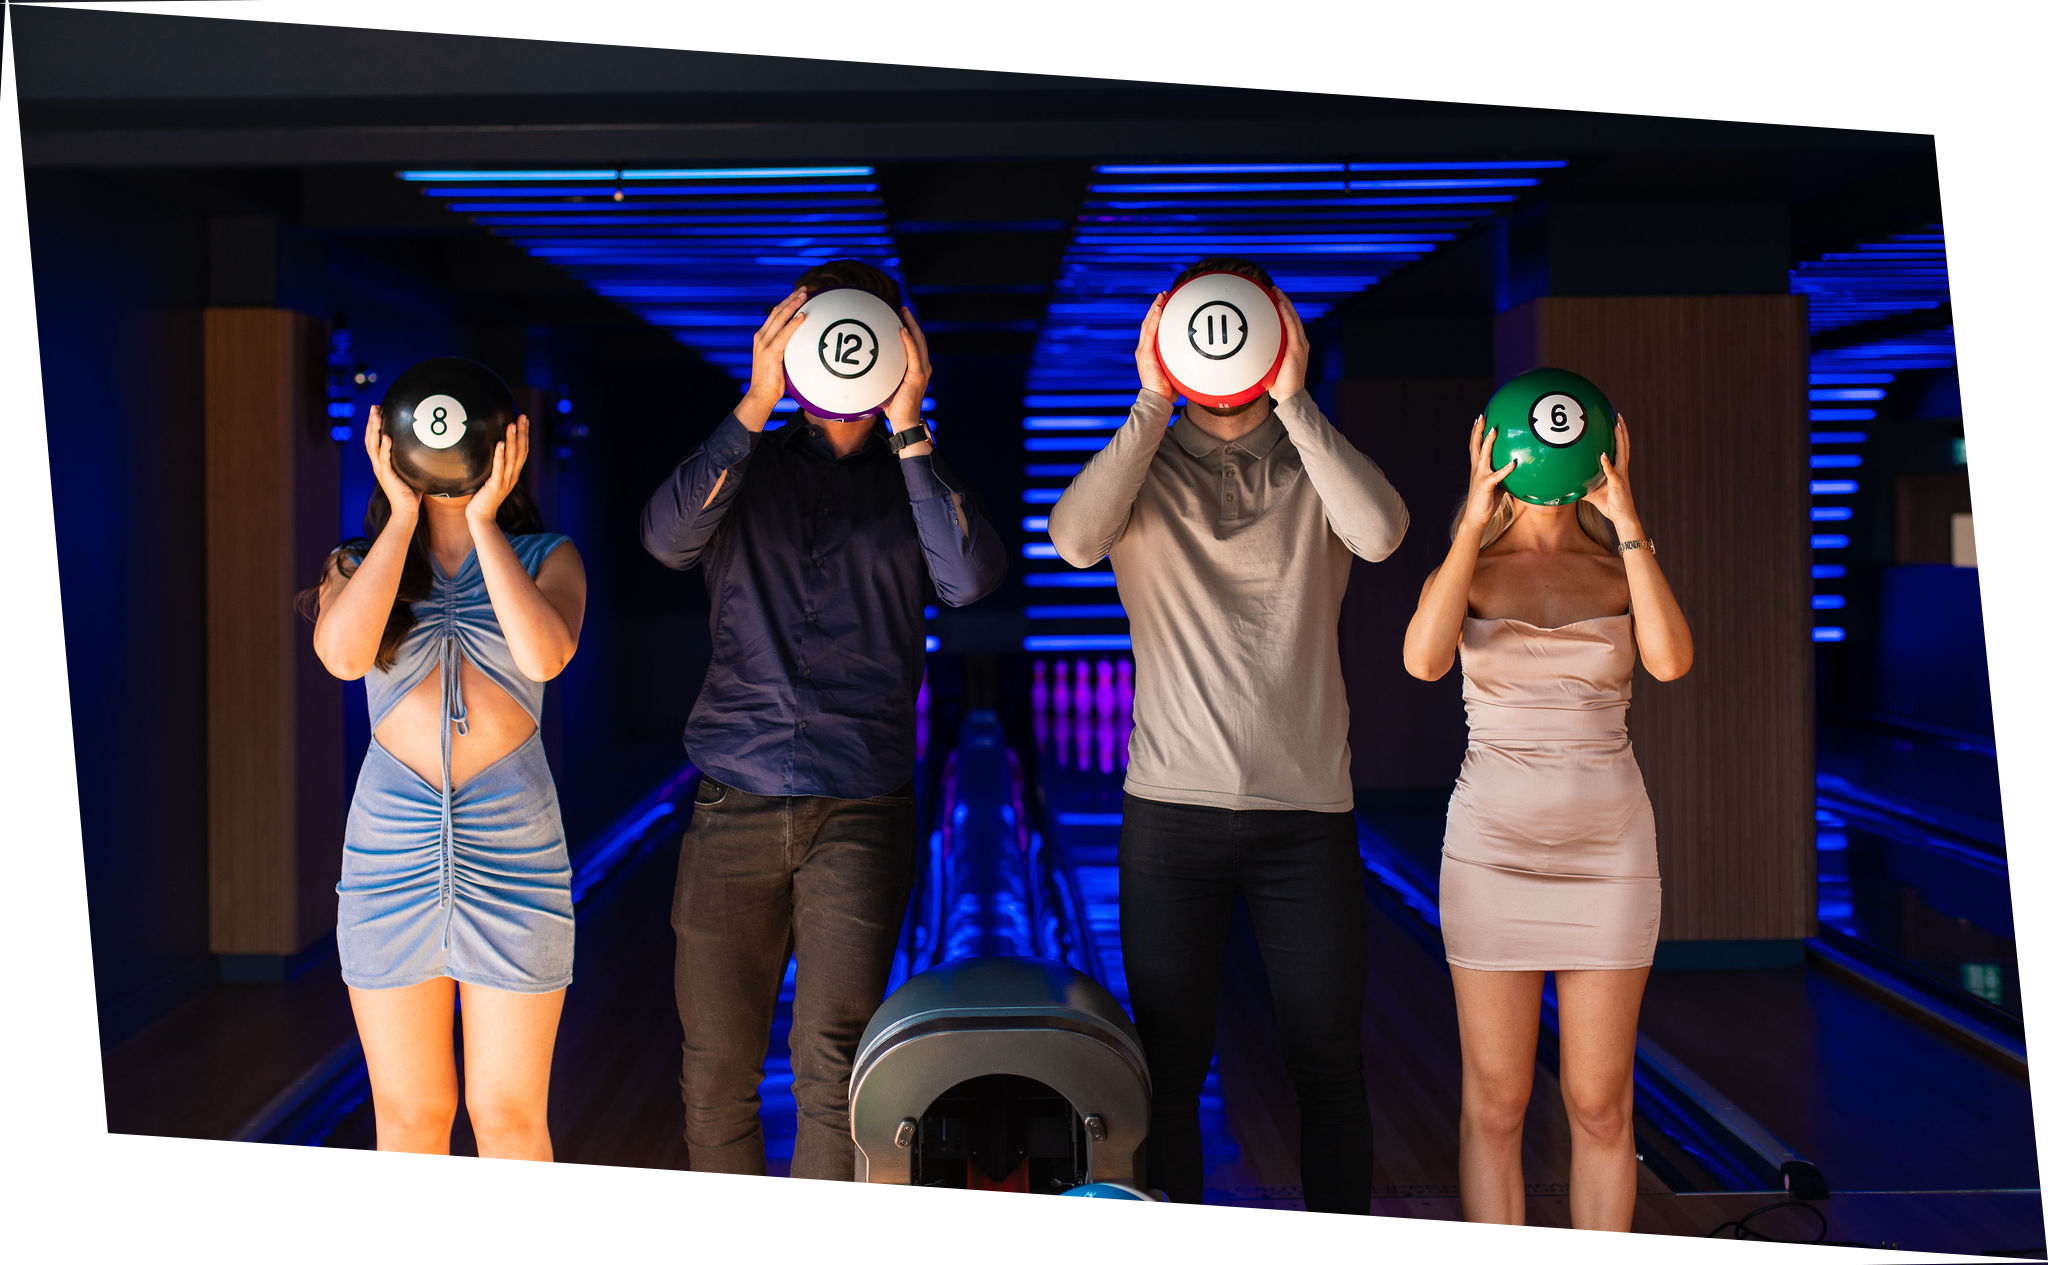 Guests posing with bowling balls in front of their faces @ VEGA Glasgow